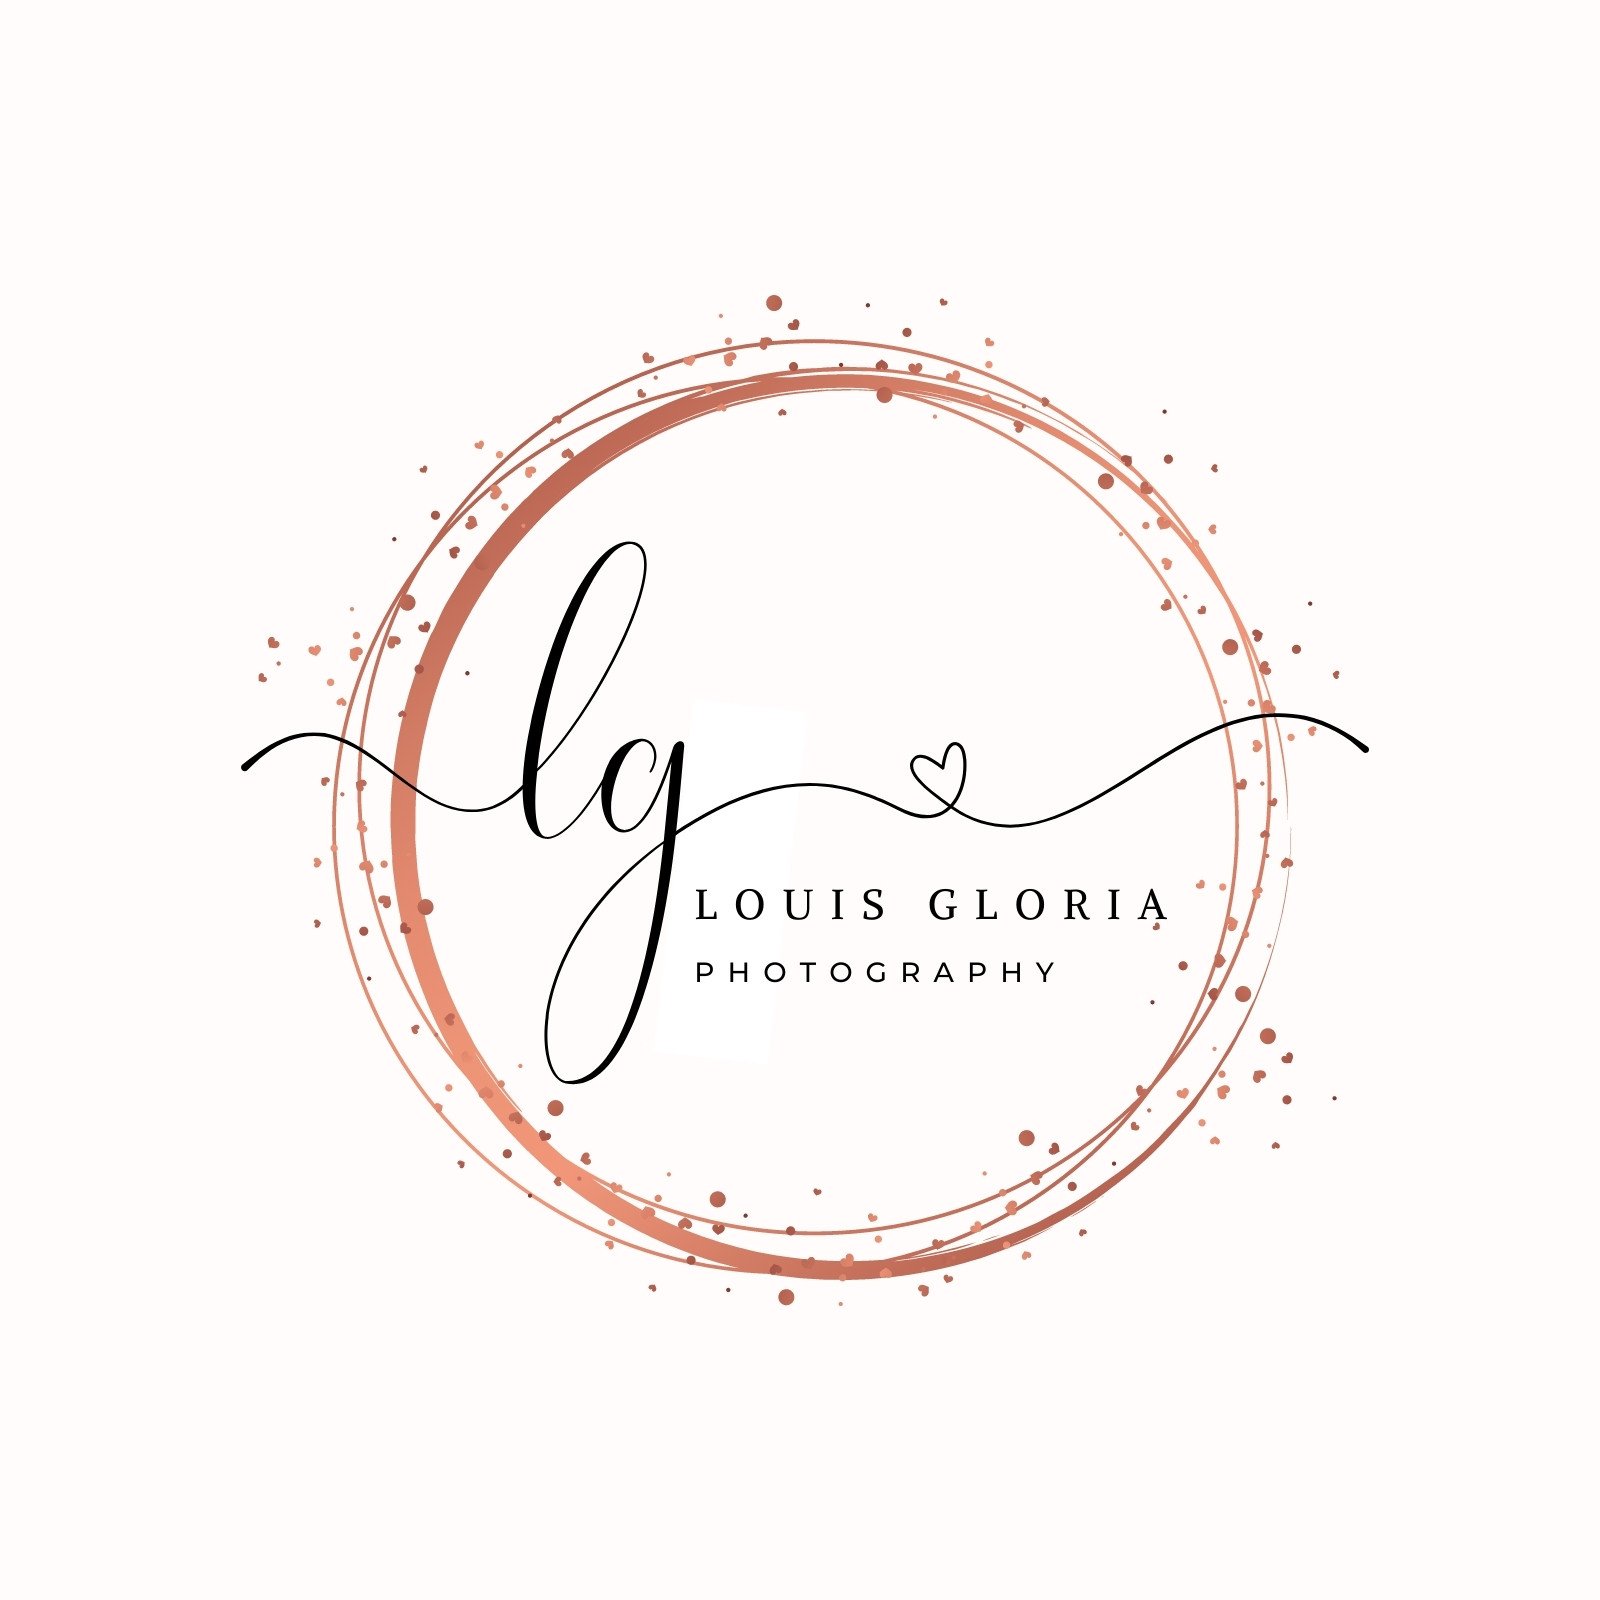 Louis Text effect and logo design Name